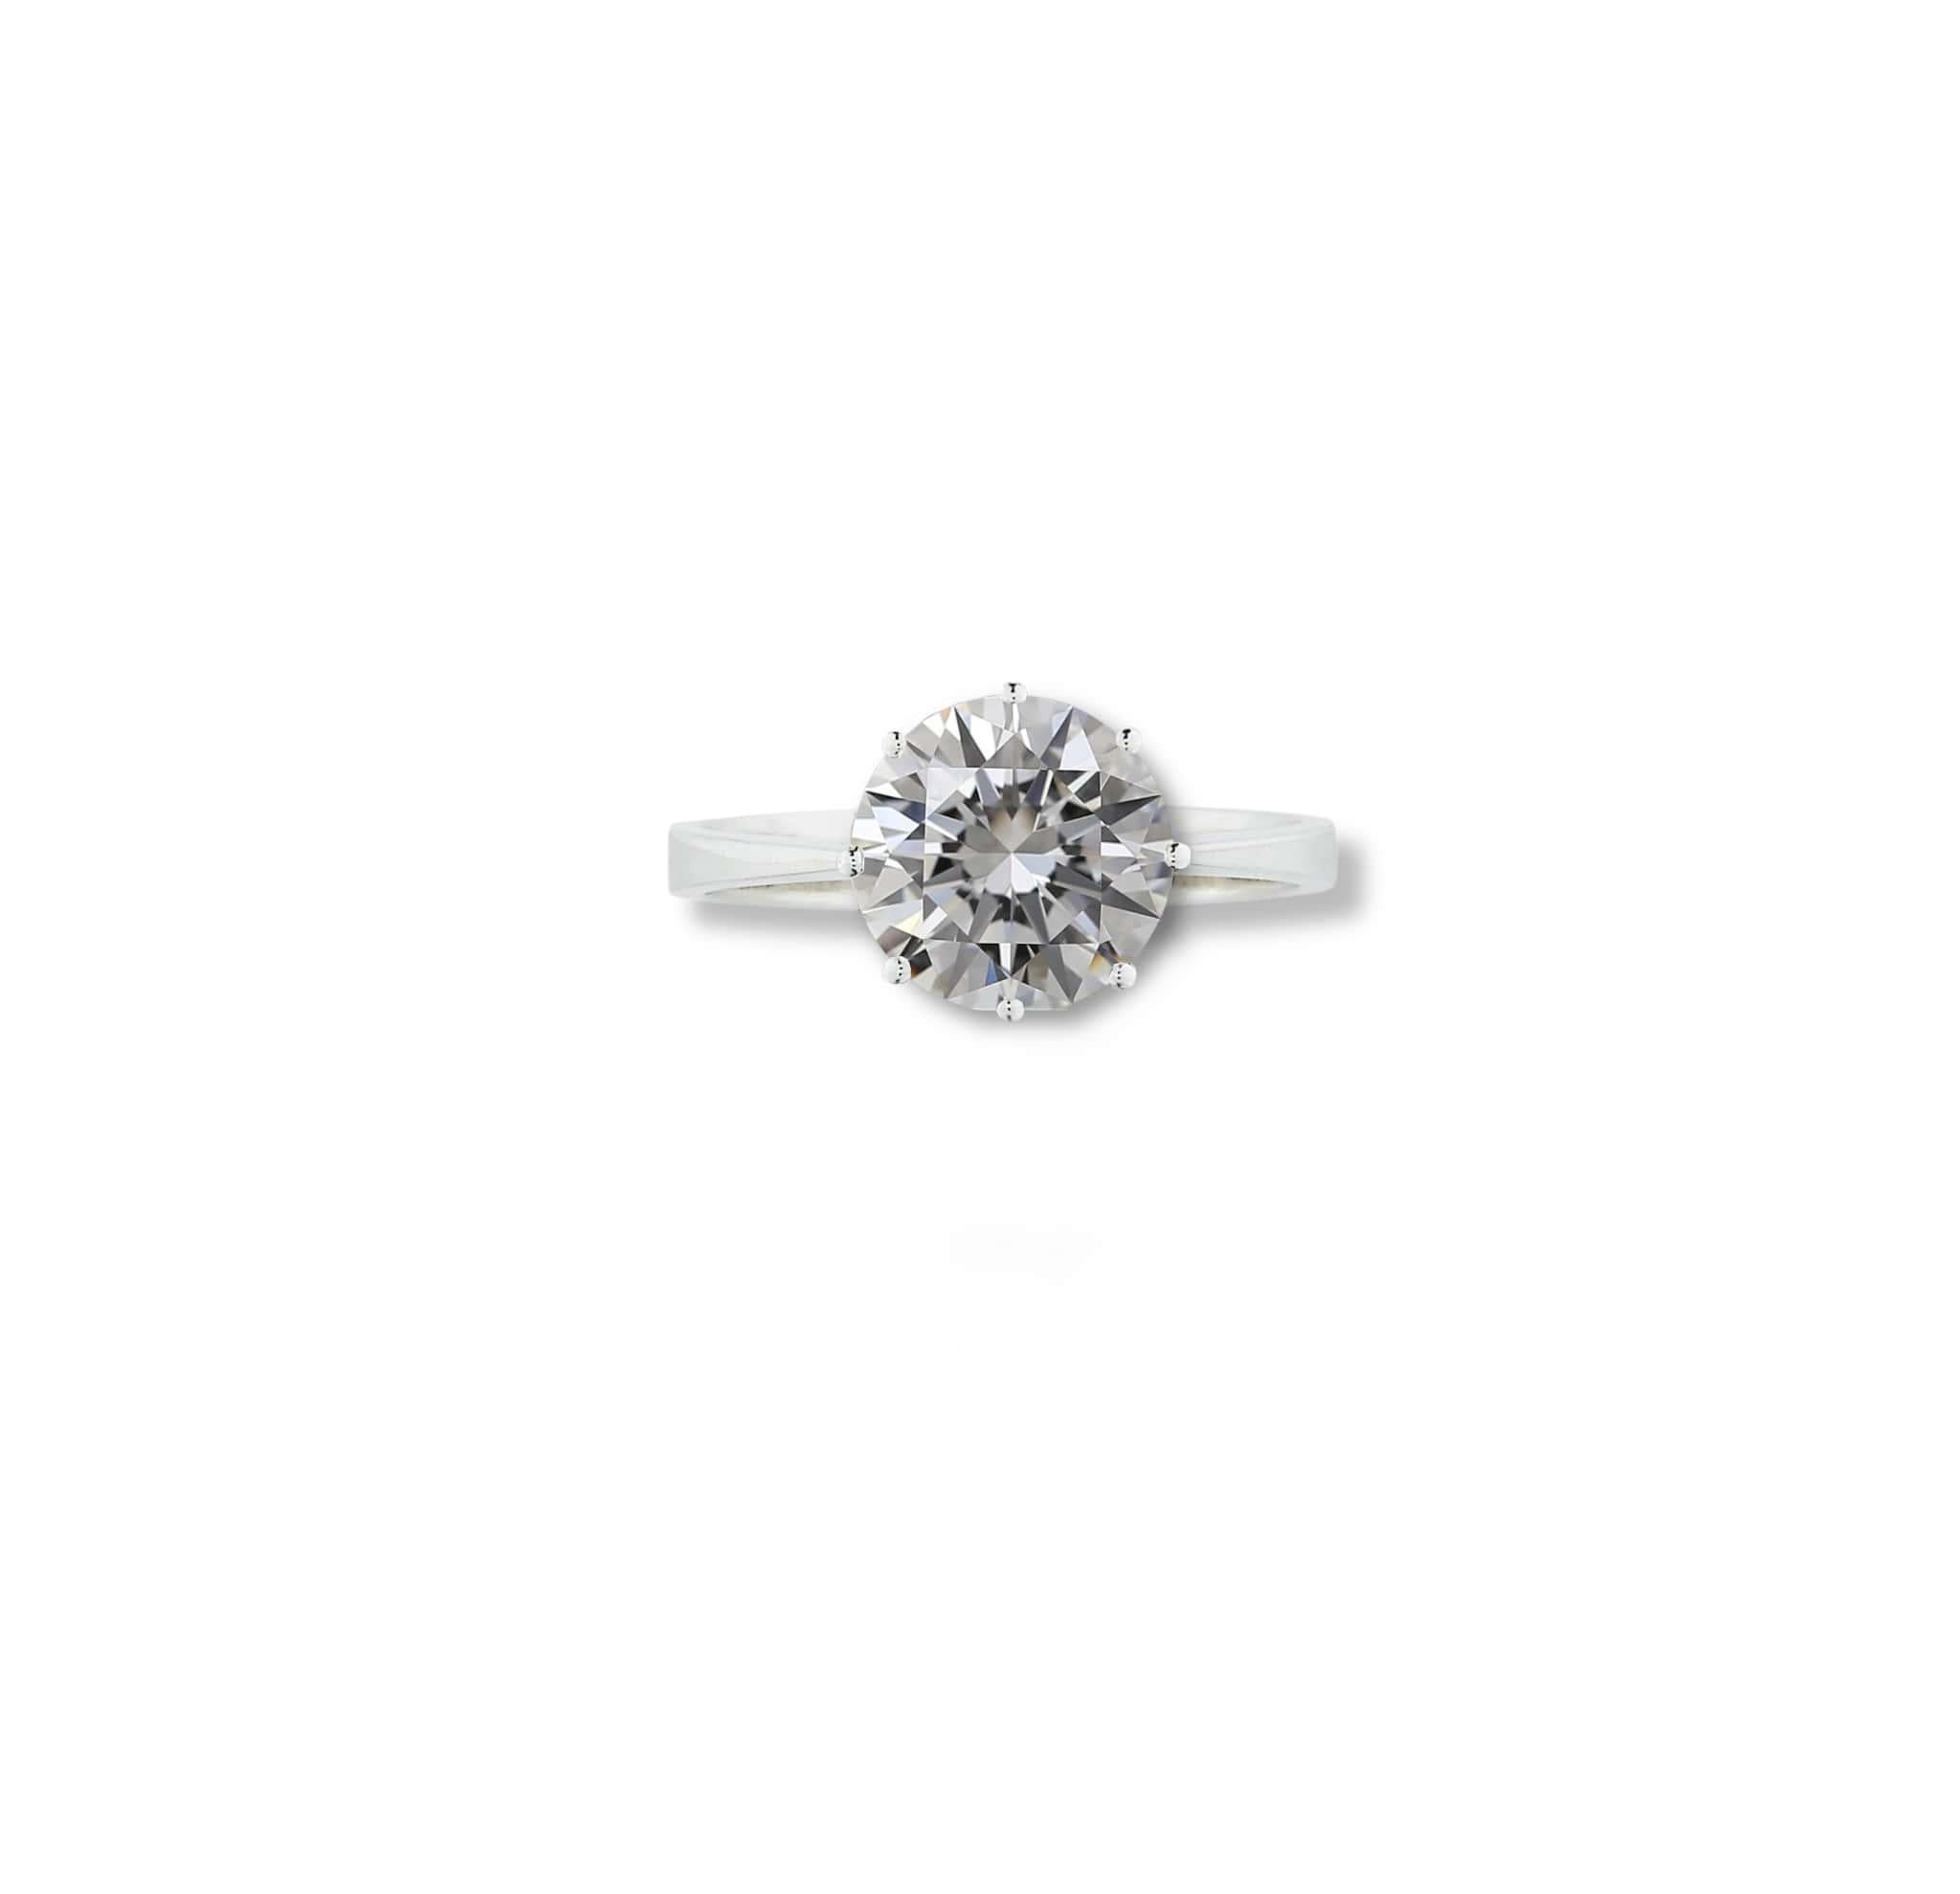 Here it's a fantastic diamond set on platinum Ring, the diamond is a super classic 3 Carat Round Cut Diamond perfect for a Solitaire or Engagement Ring.
Greate color and VS Clarity with Excellent Cut 